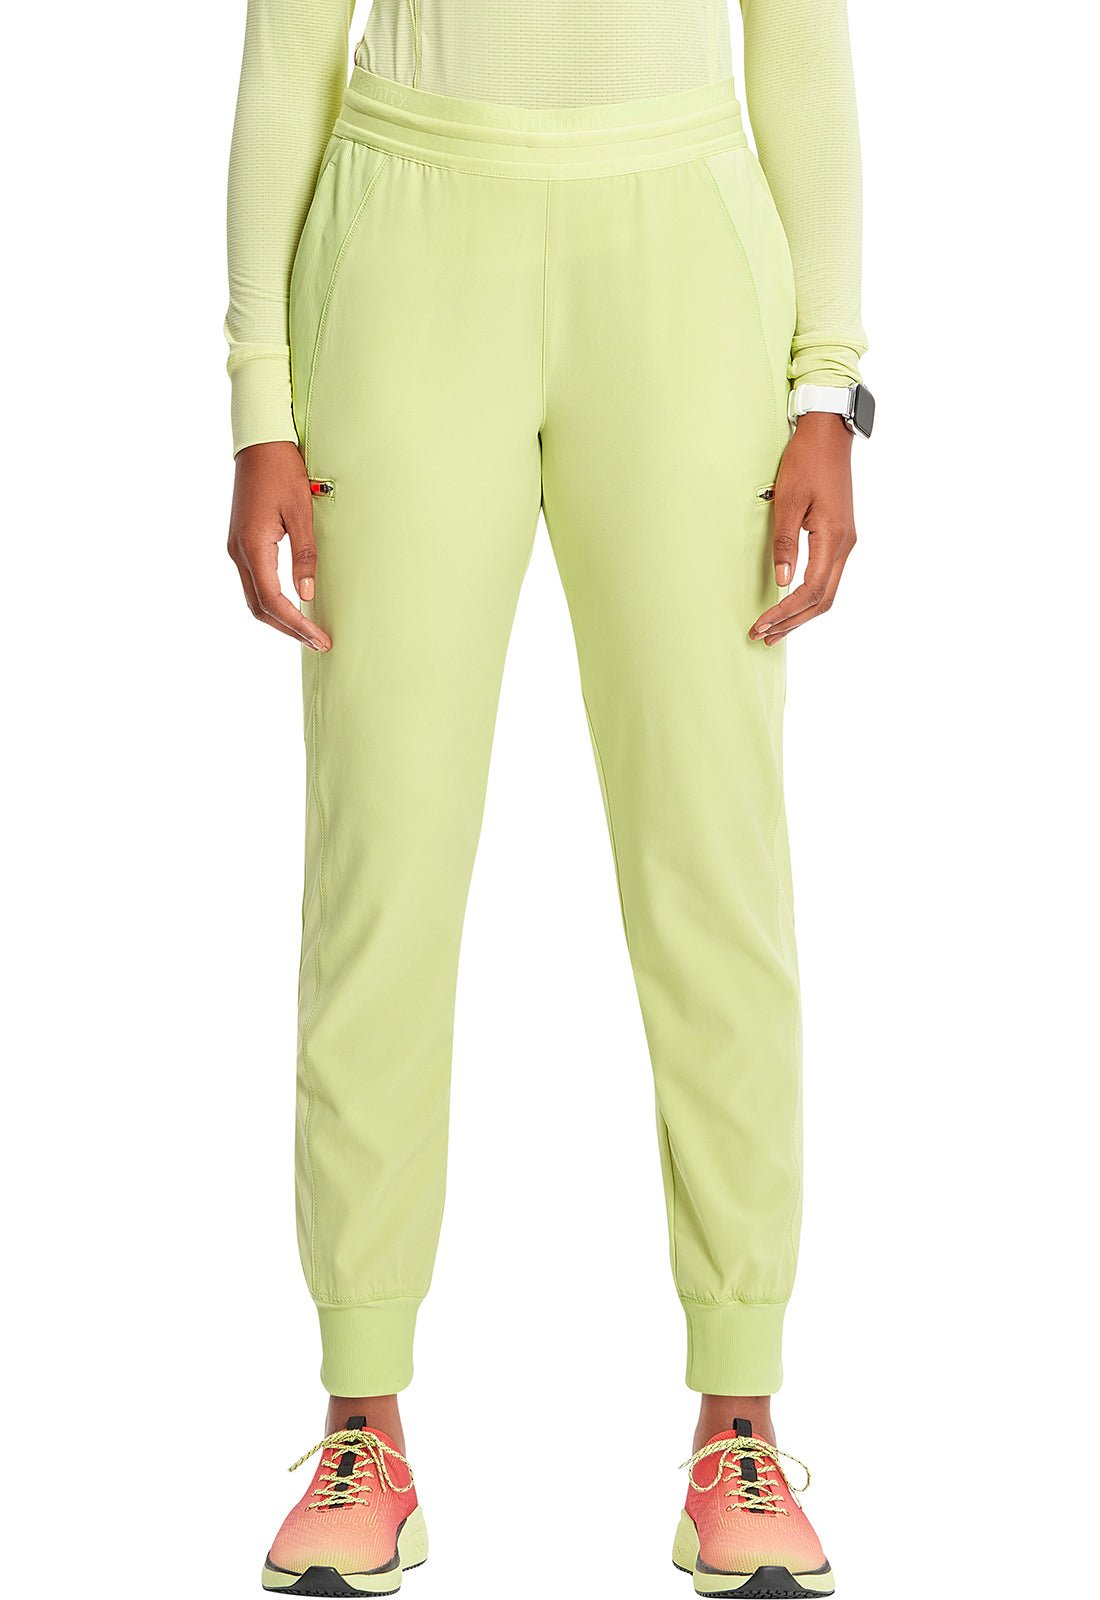 Cherokee Infinity GNR8 Jogger Pant IN122A in Electric Coral, Green